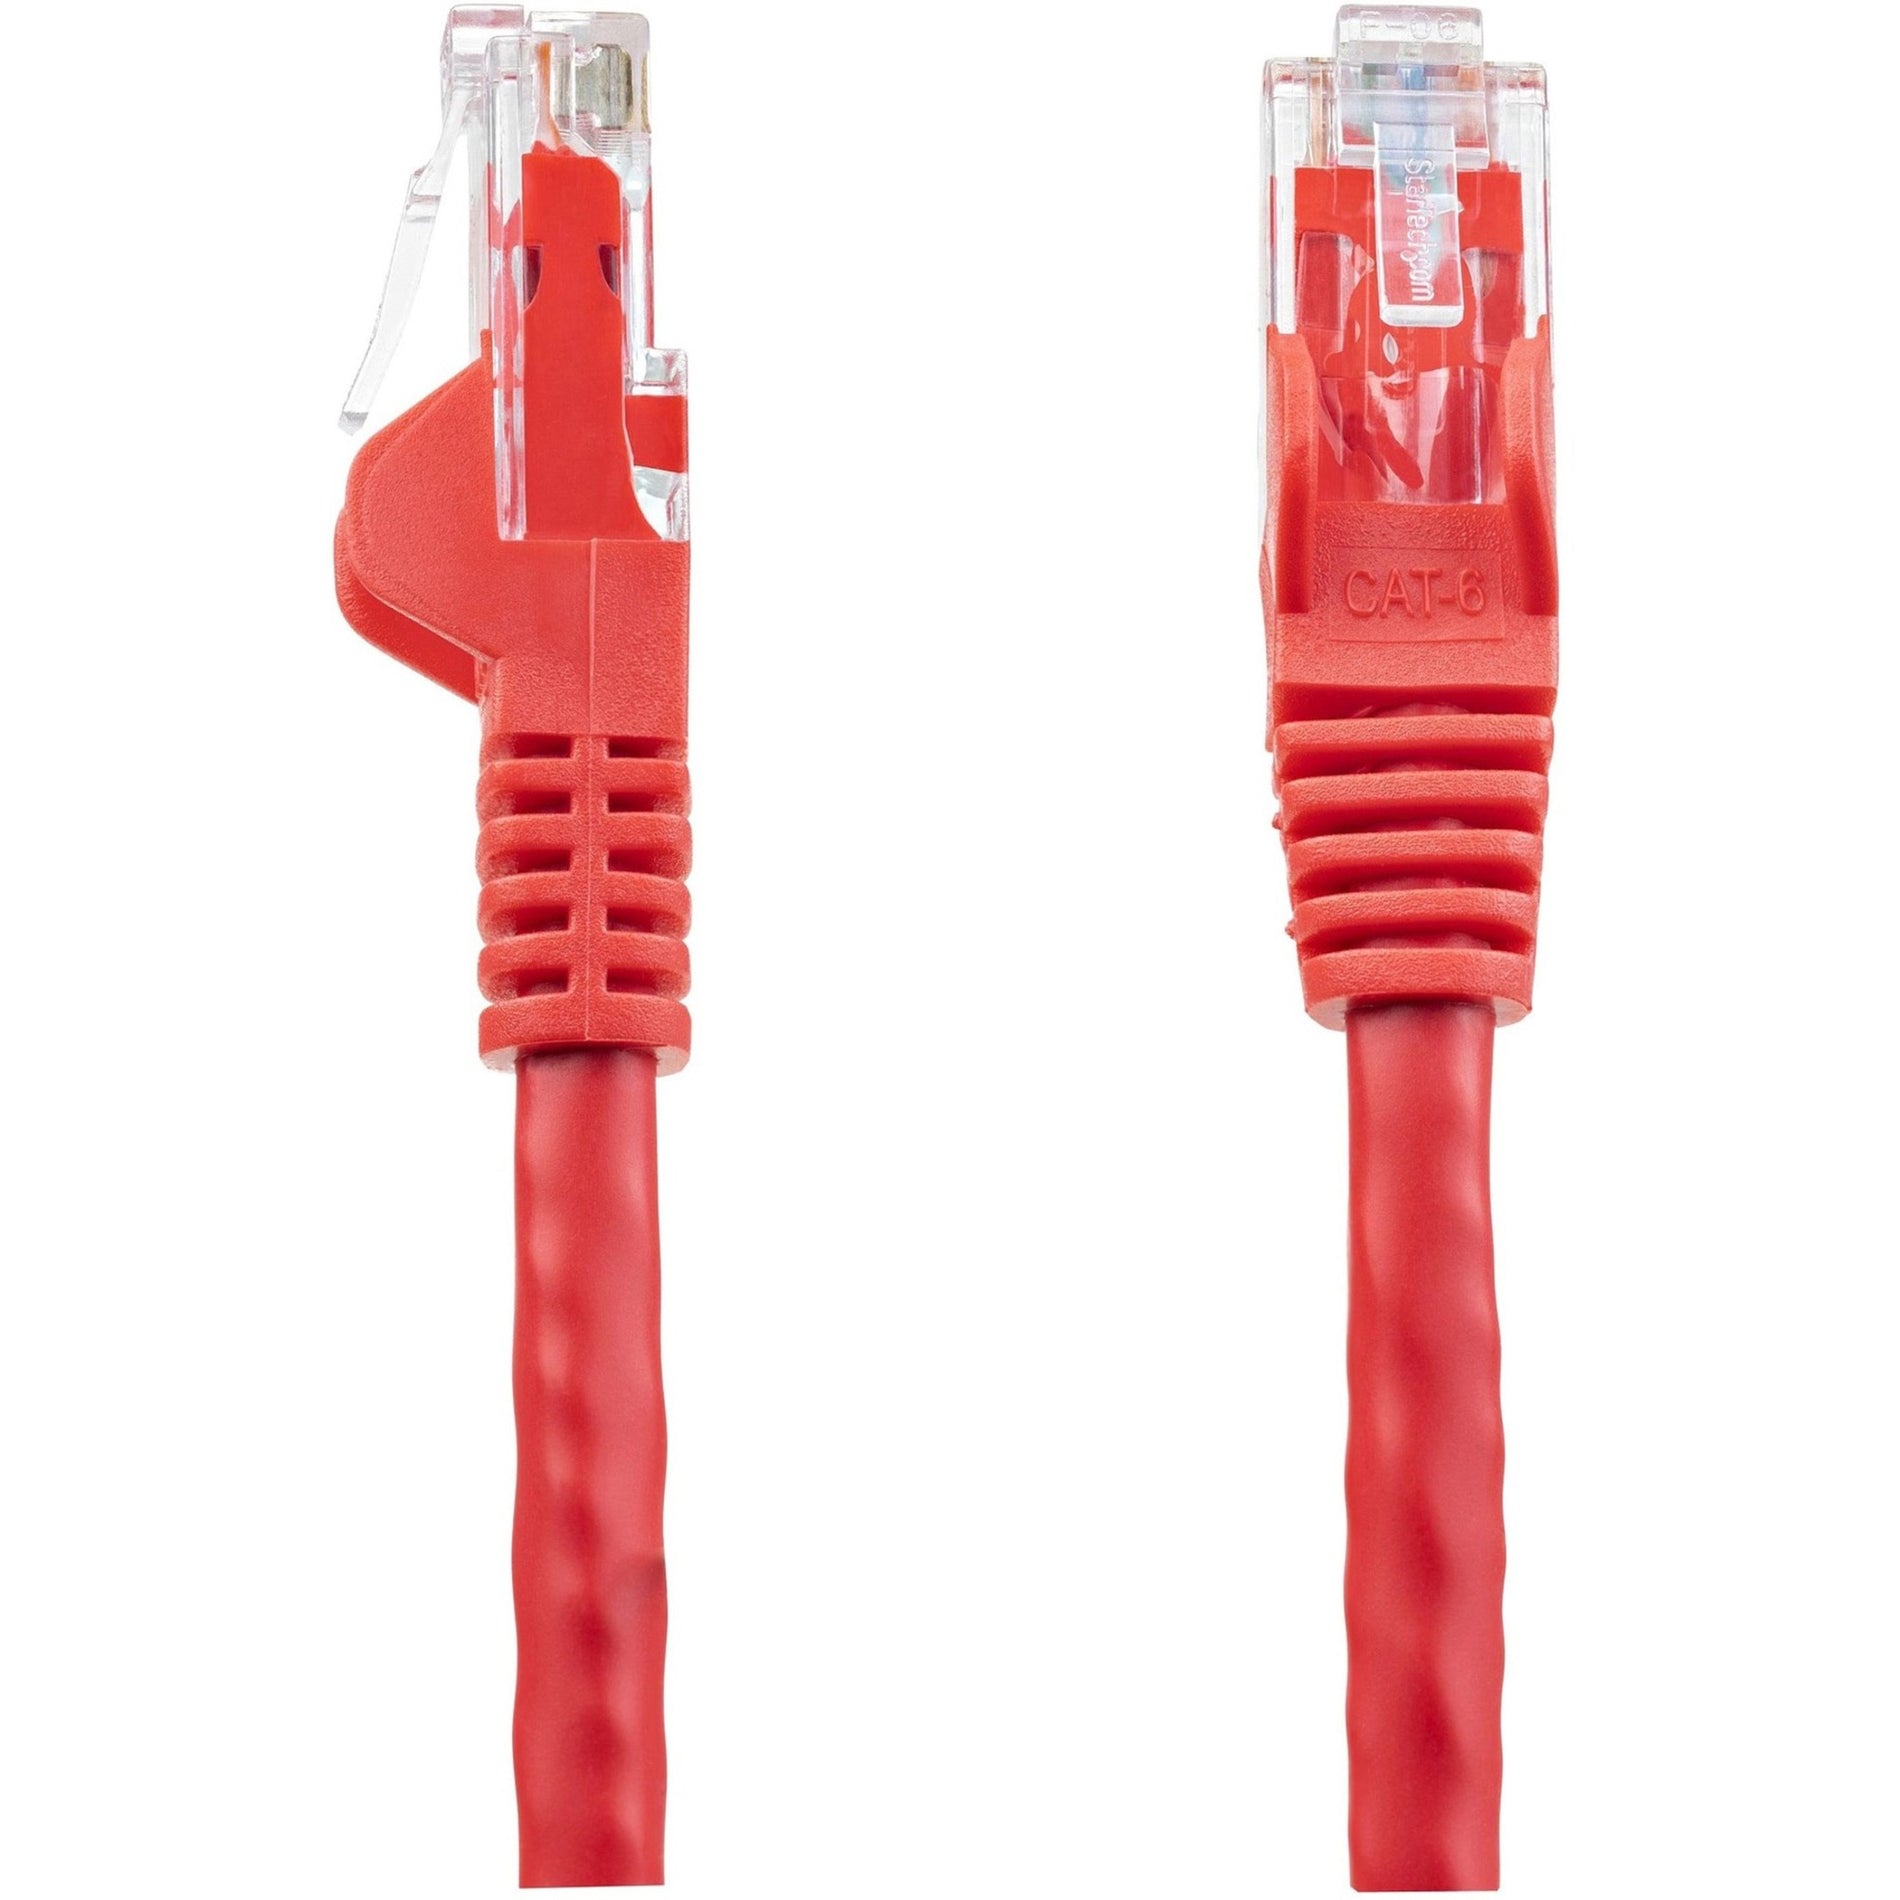 StarTech.com N6PATCH30RD Cat. 6 Network Cable, 30ft Red Ethernet Cable, Snagless RJ45 Connectors